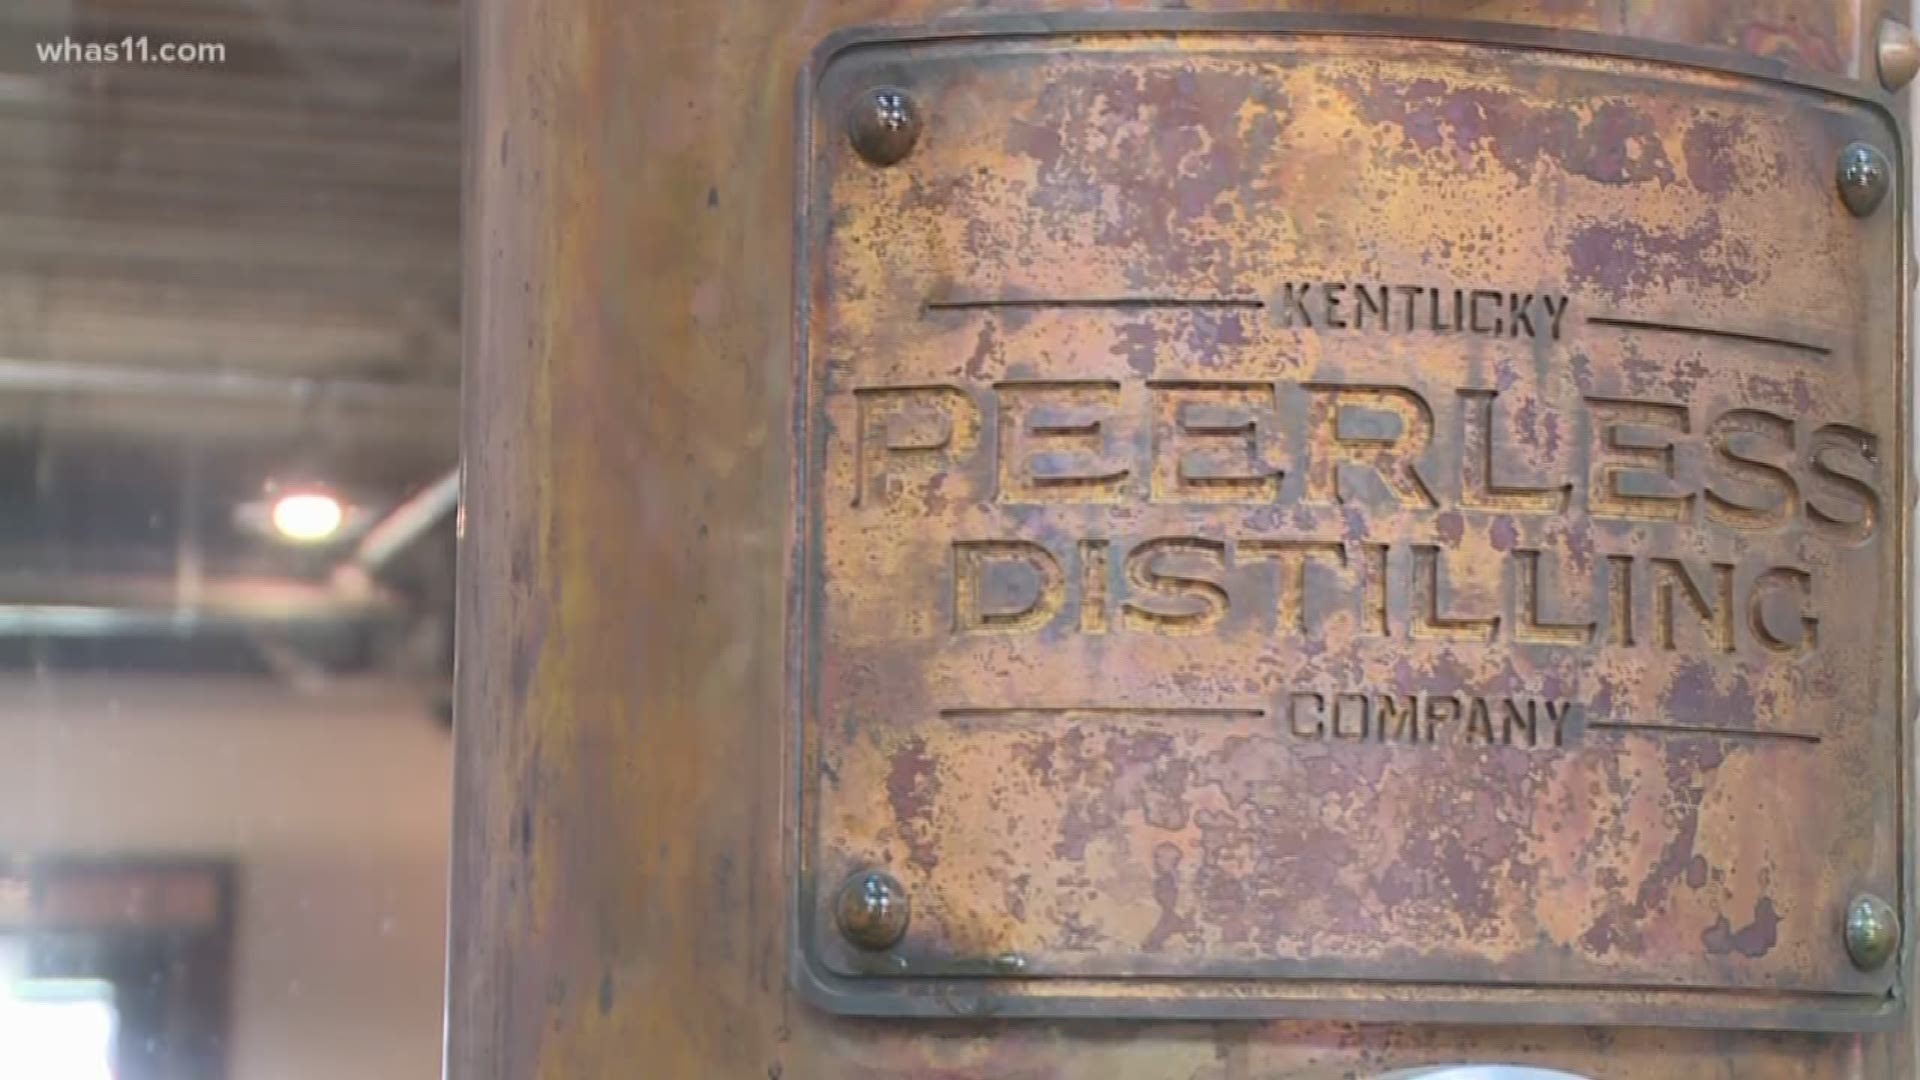 The history of Kentucky Peerless bourbon starts in the heart of Louisville in the early 1880s at time when Whiskey Row was crowded with companies.